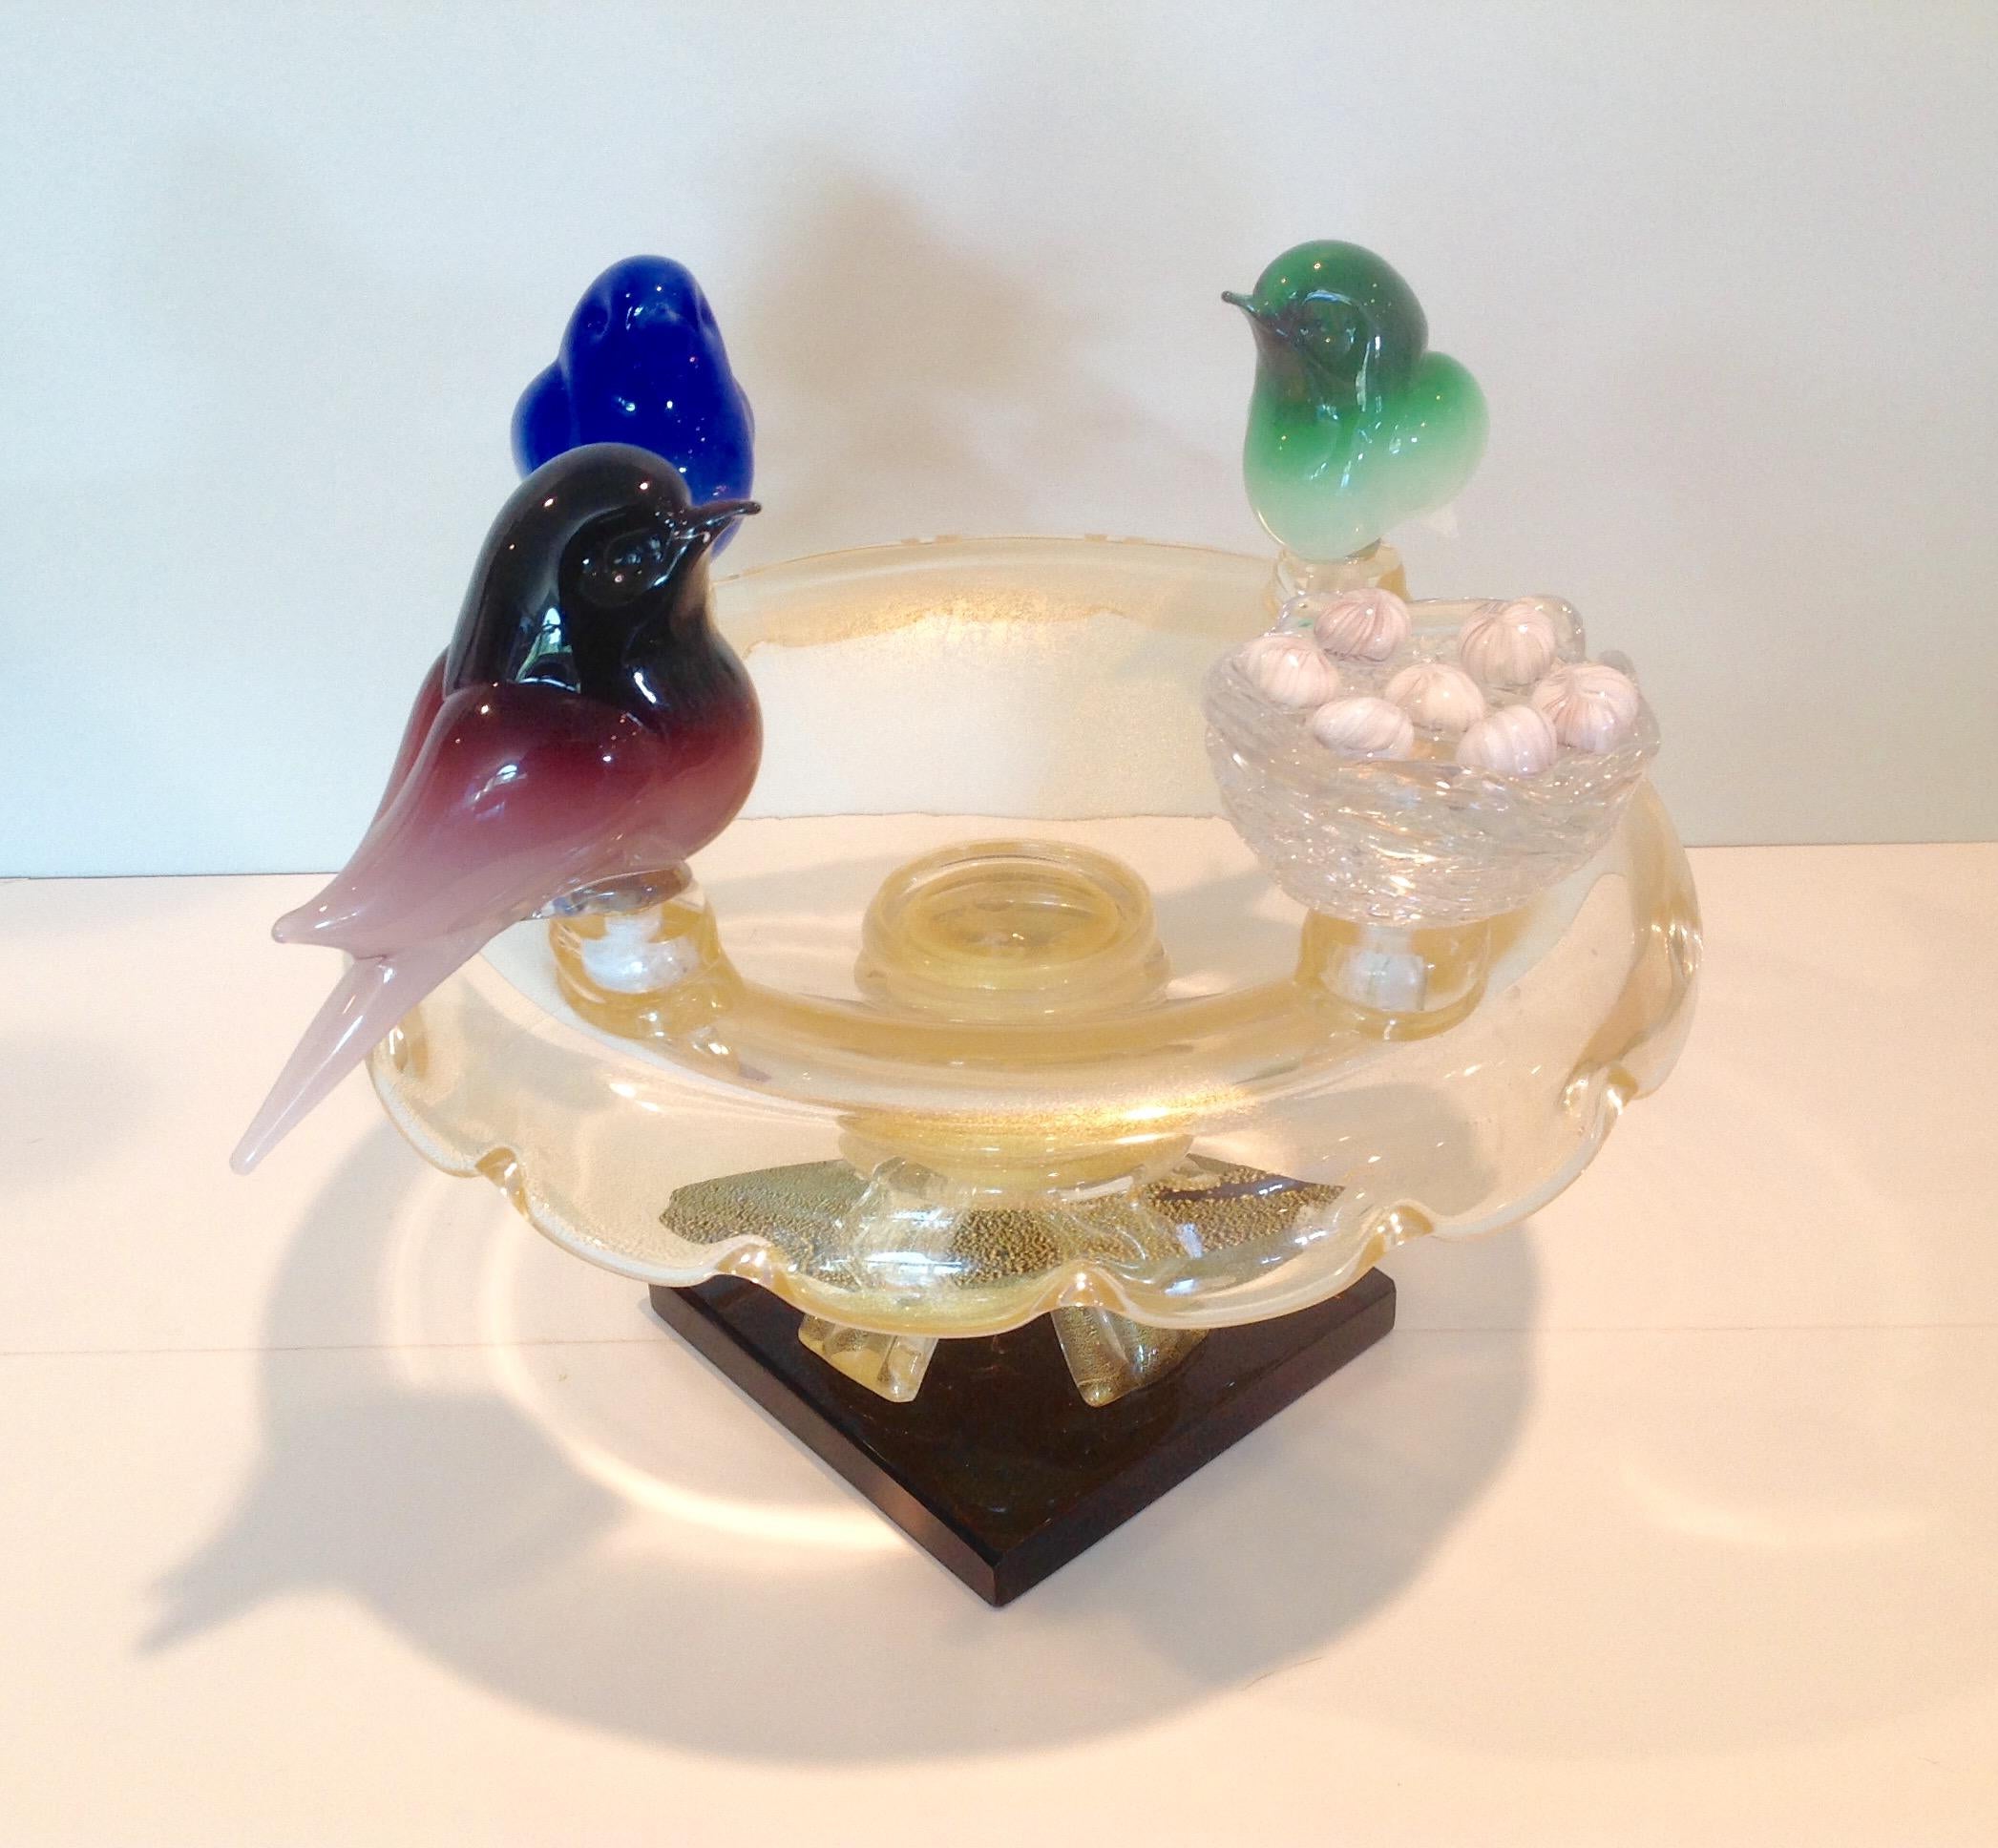 Large and colorful signed Murano bird bath sculpture by Walter Furlan. Large size. Birds are removable and can be switched for optimal favorite display.